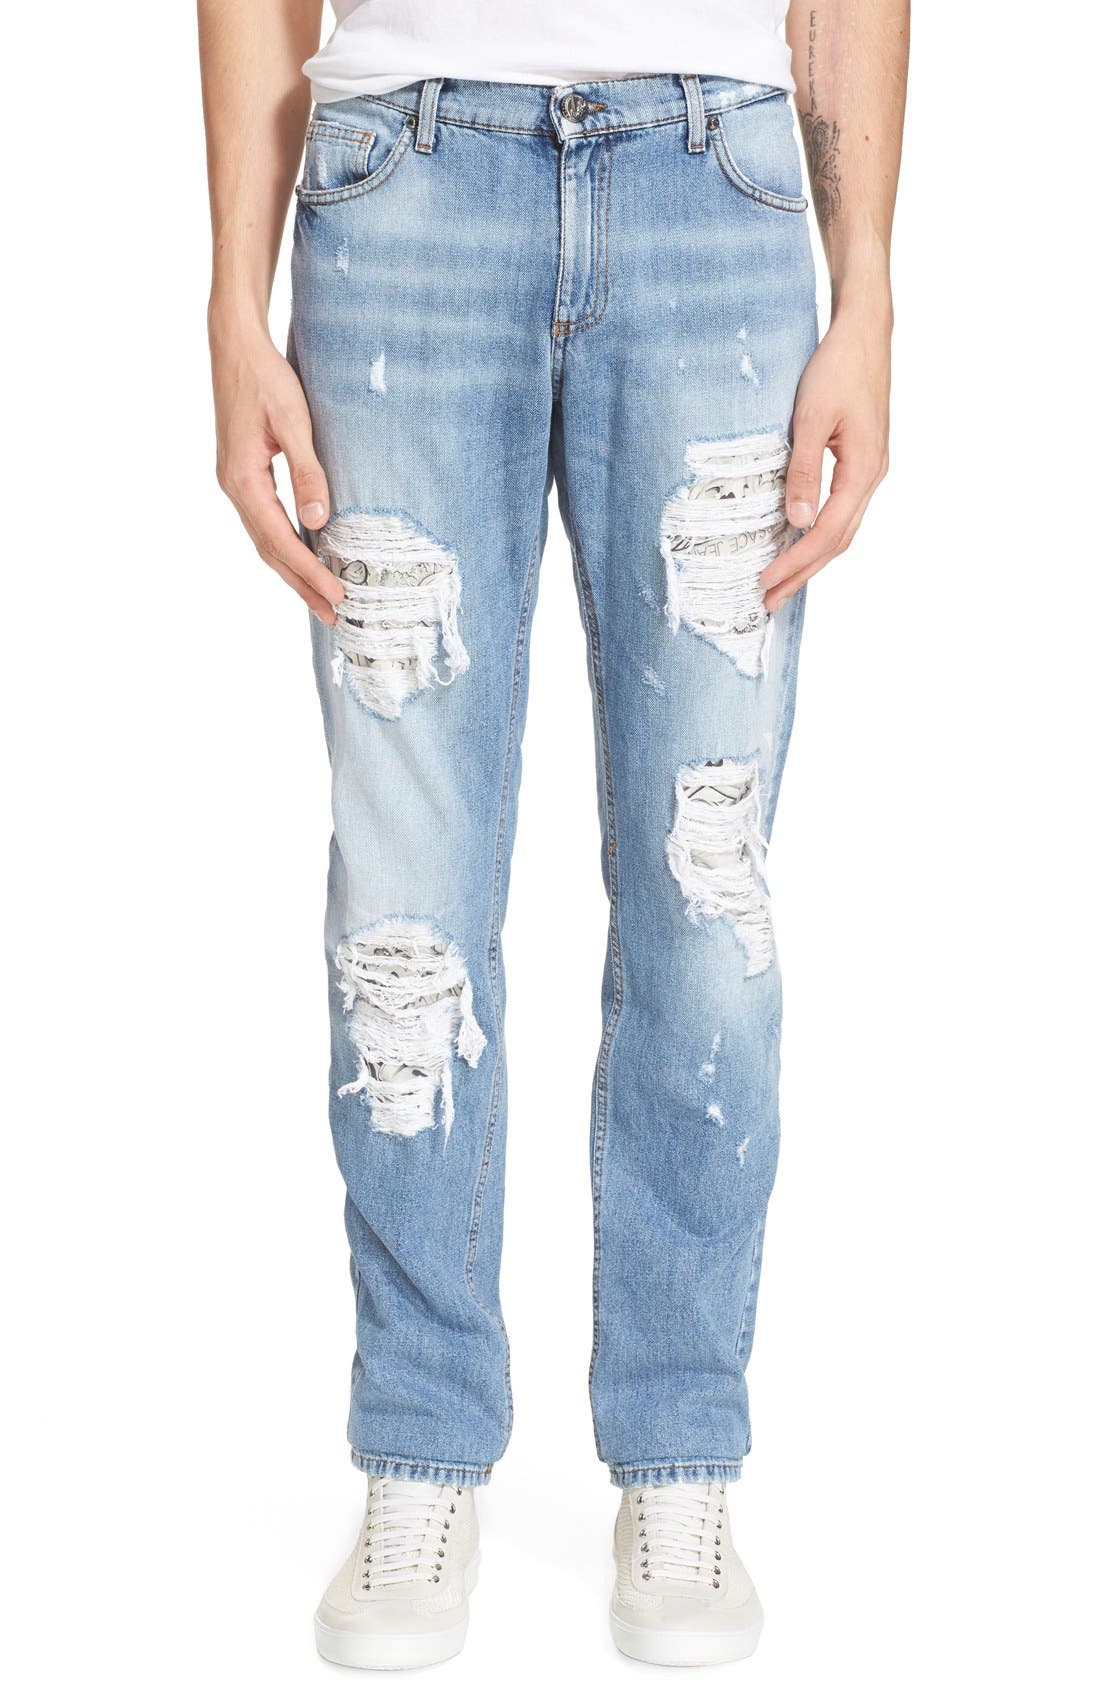 stylish jeans for men 2019